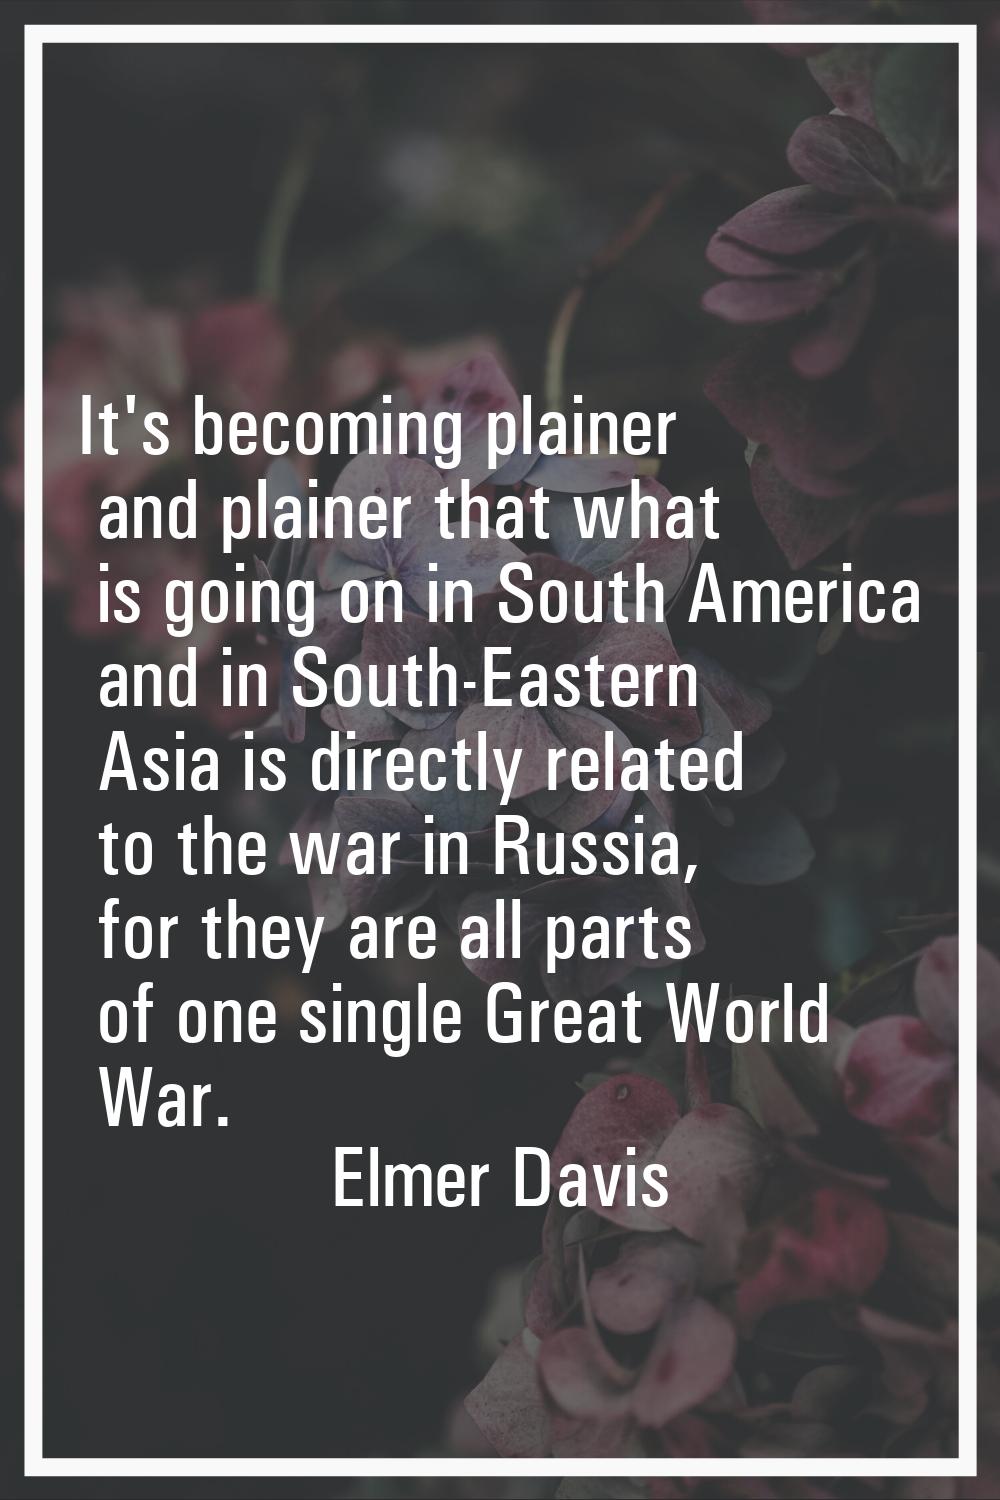 It's becoming plainer and plainer that what is going on in South America and in South-Eastern Asia 